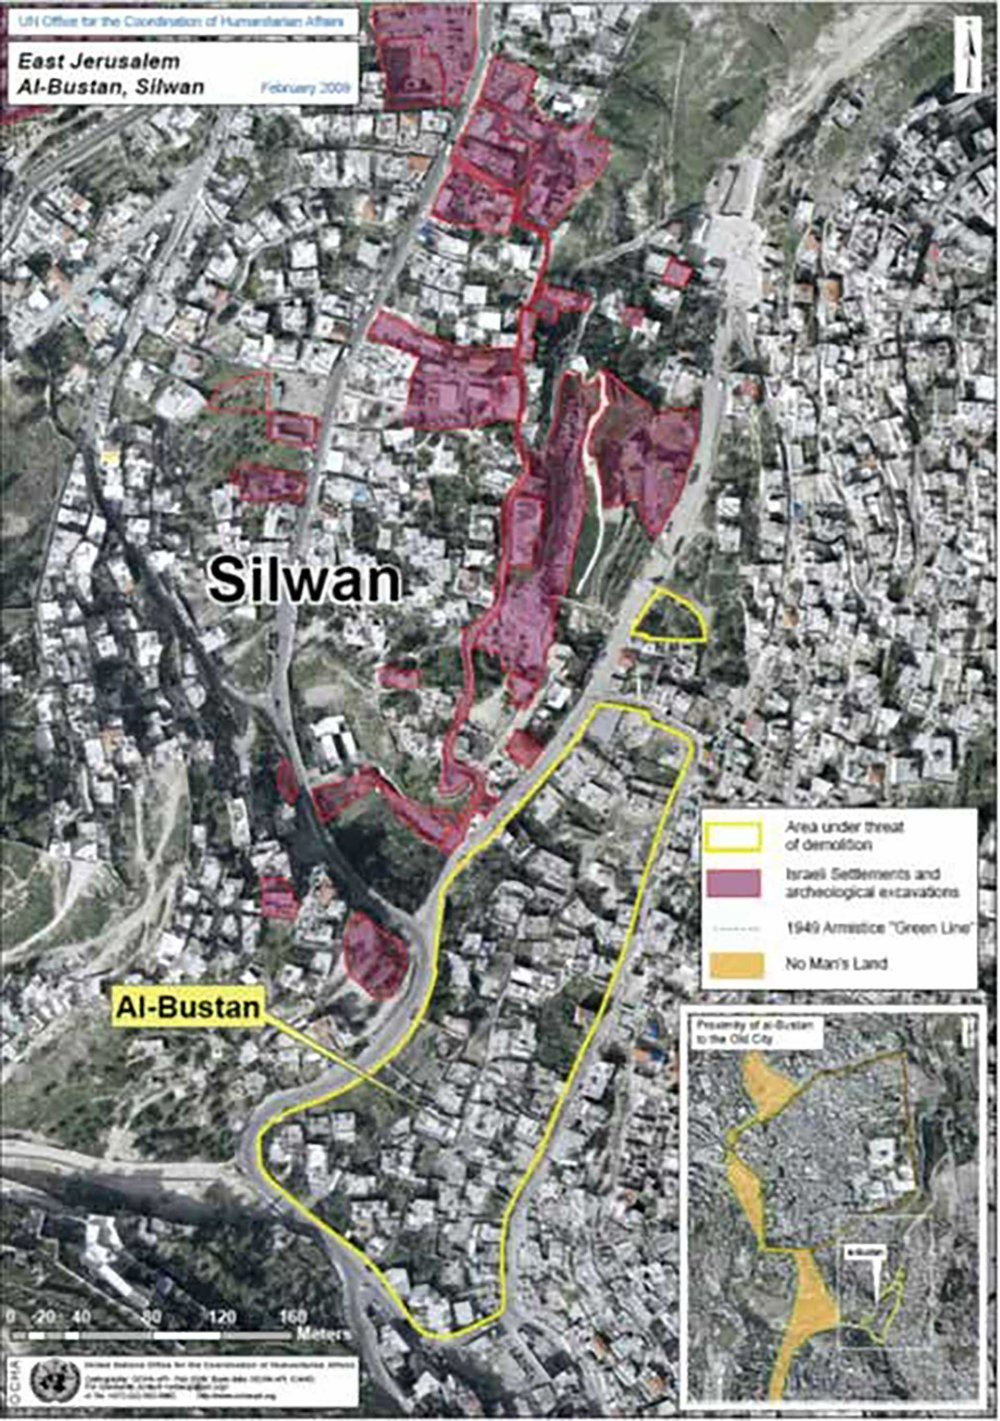 A map of al-Bustan neighborhood and the rest of Silwan neighborhoods showing the settlers’ control